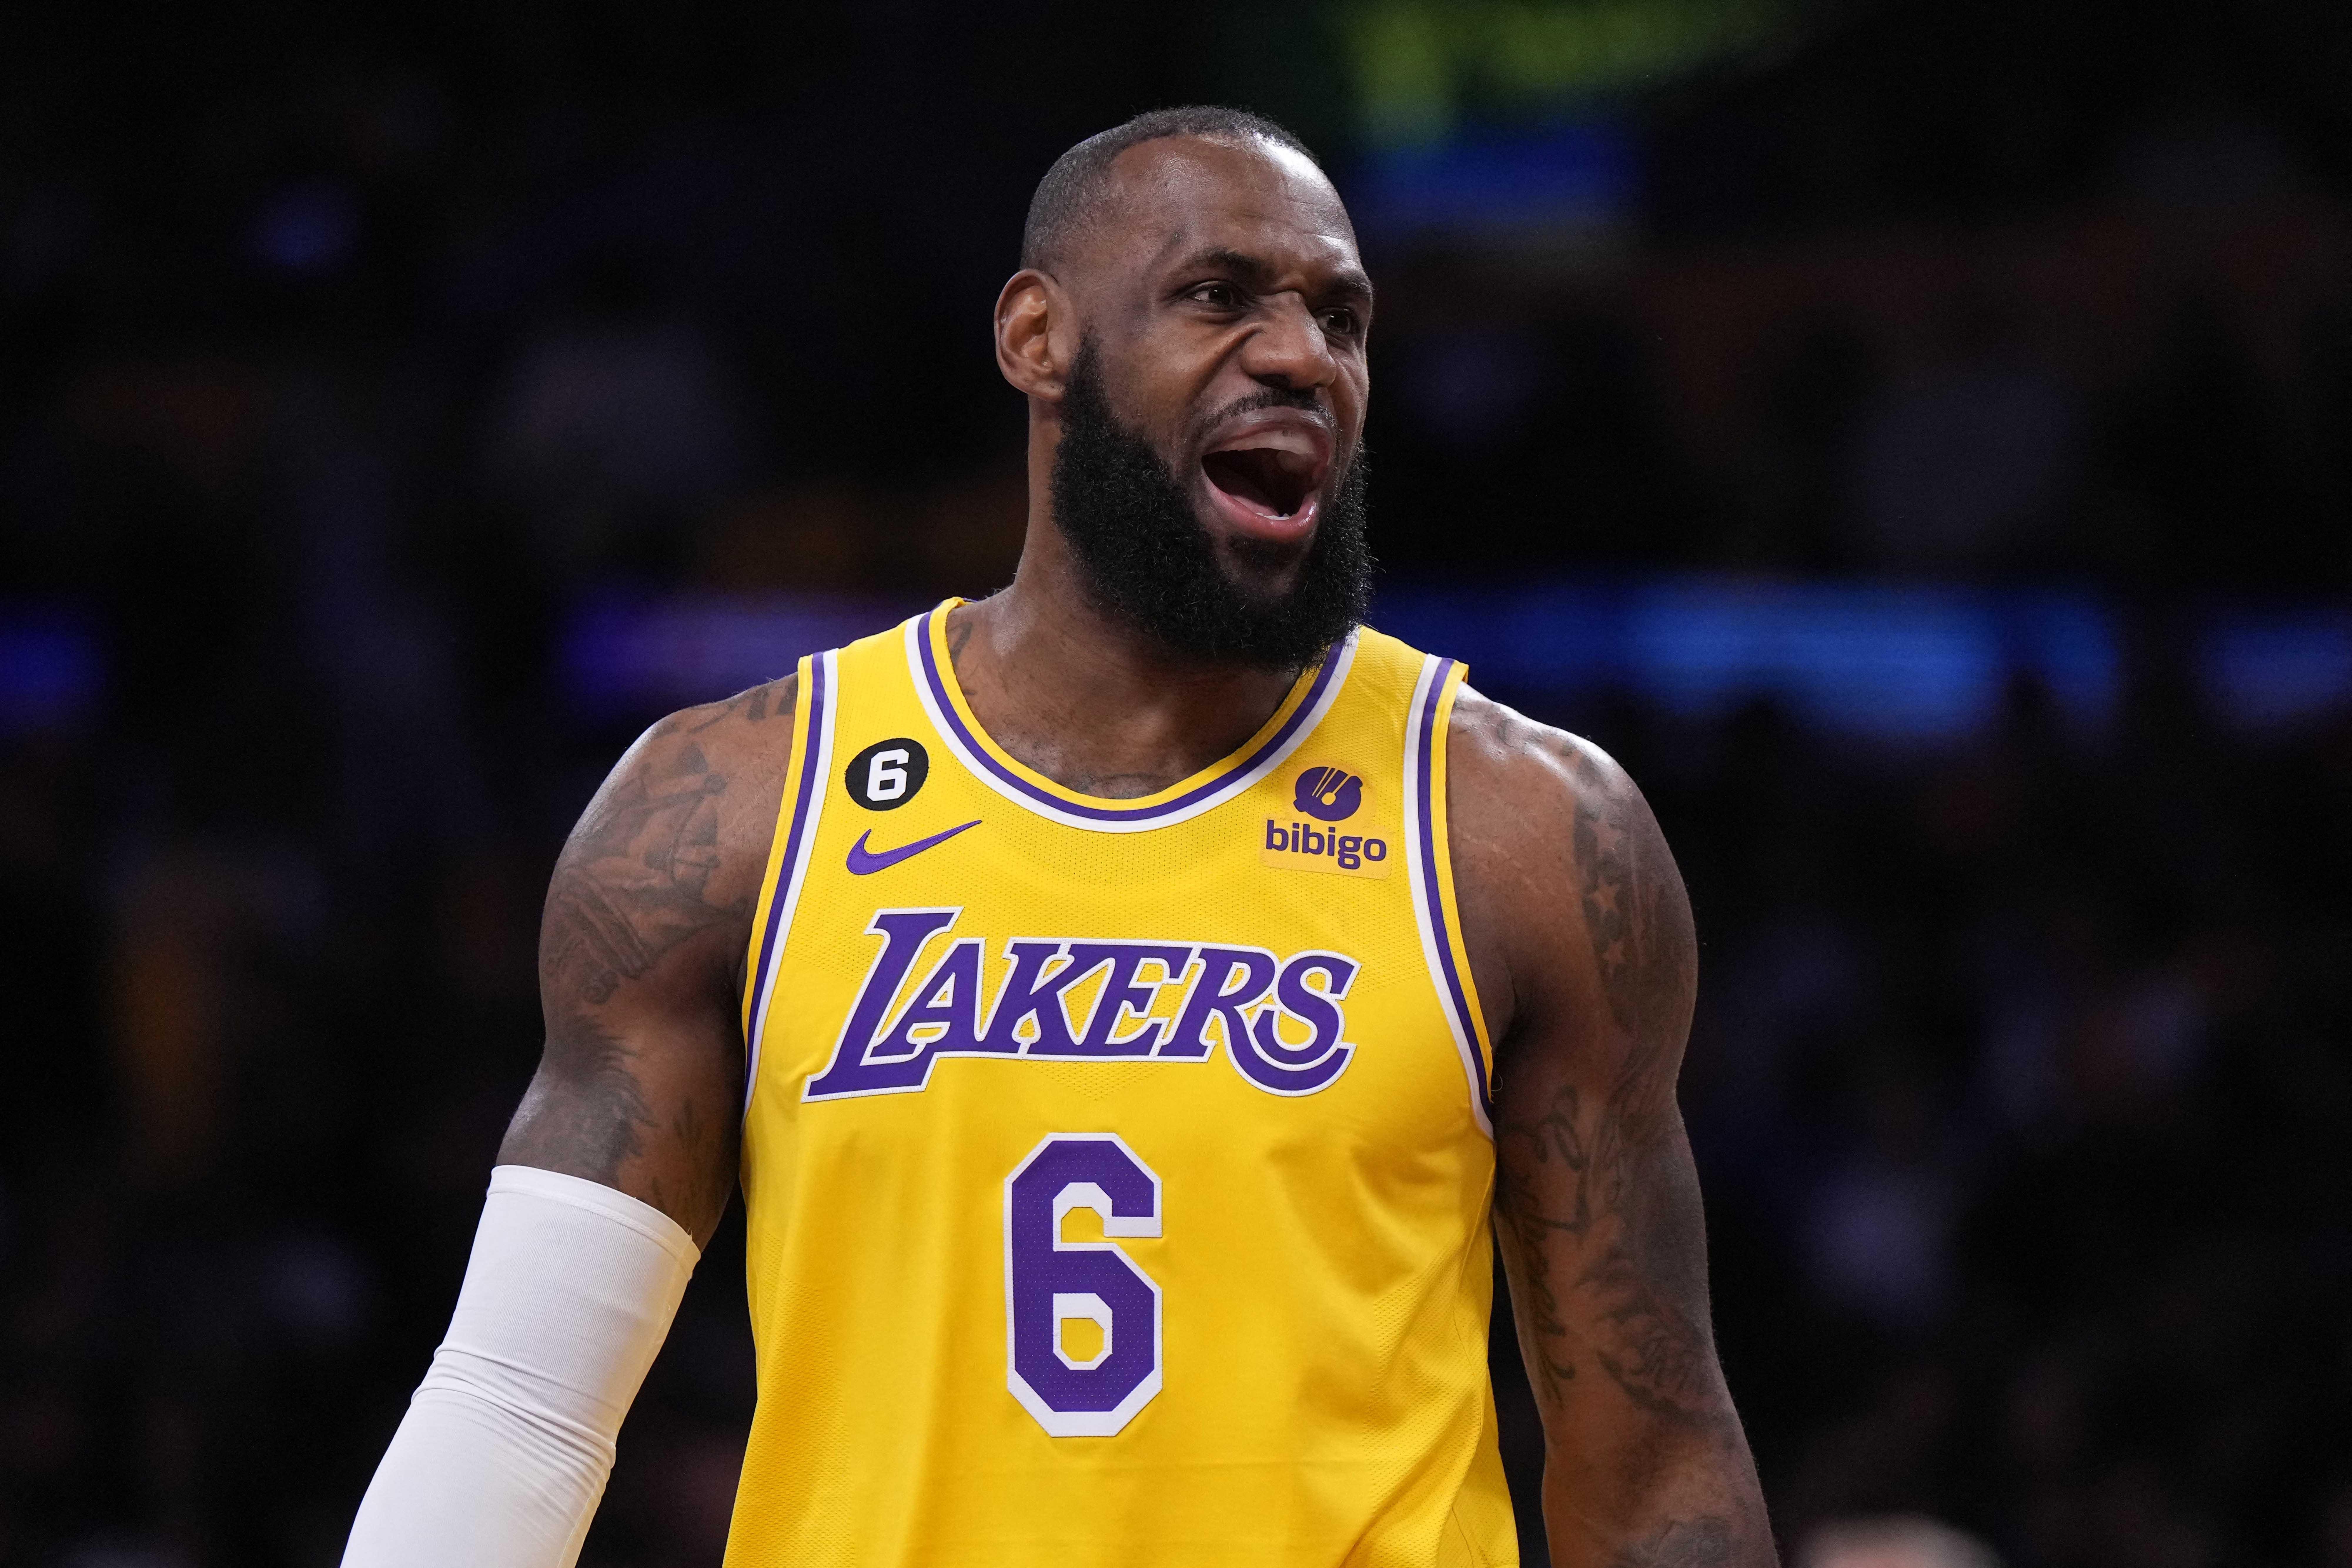 LeBron James and other NBA stars are eyeing Paris Olympics - Los